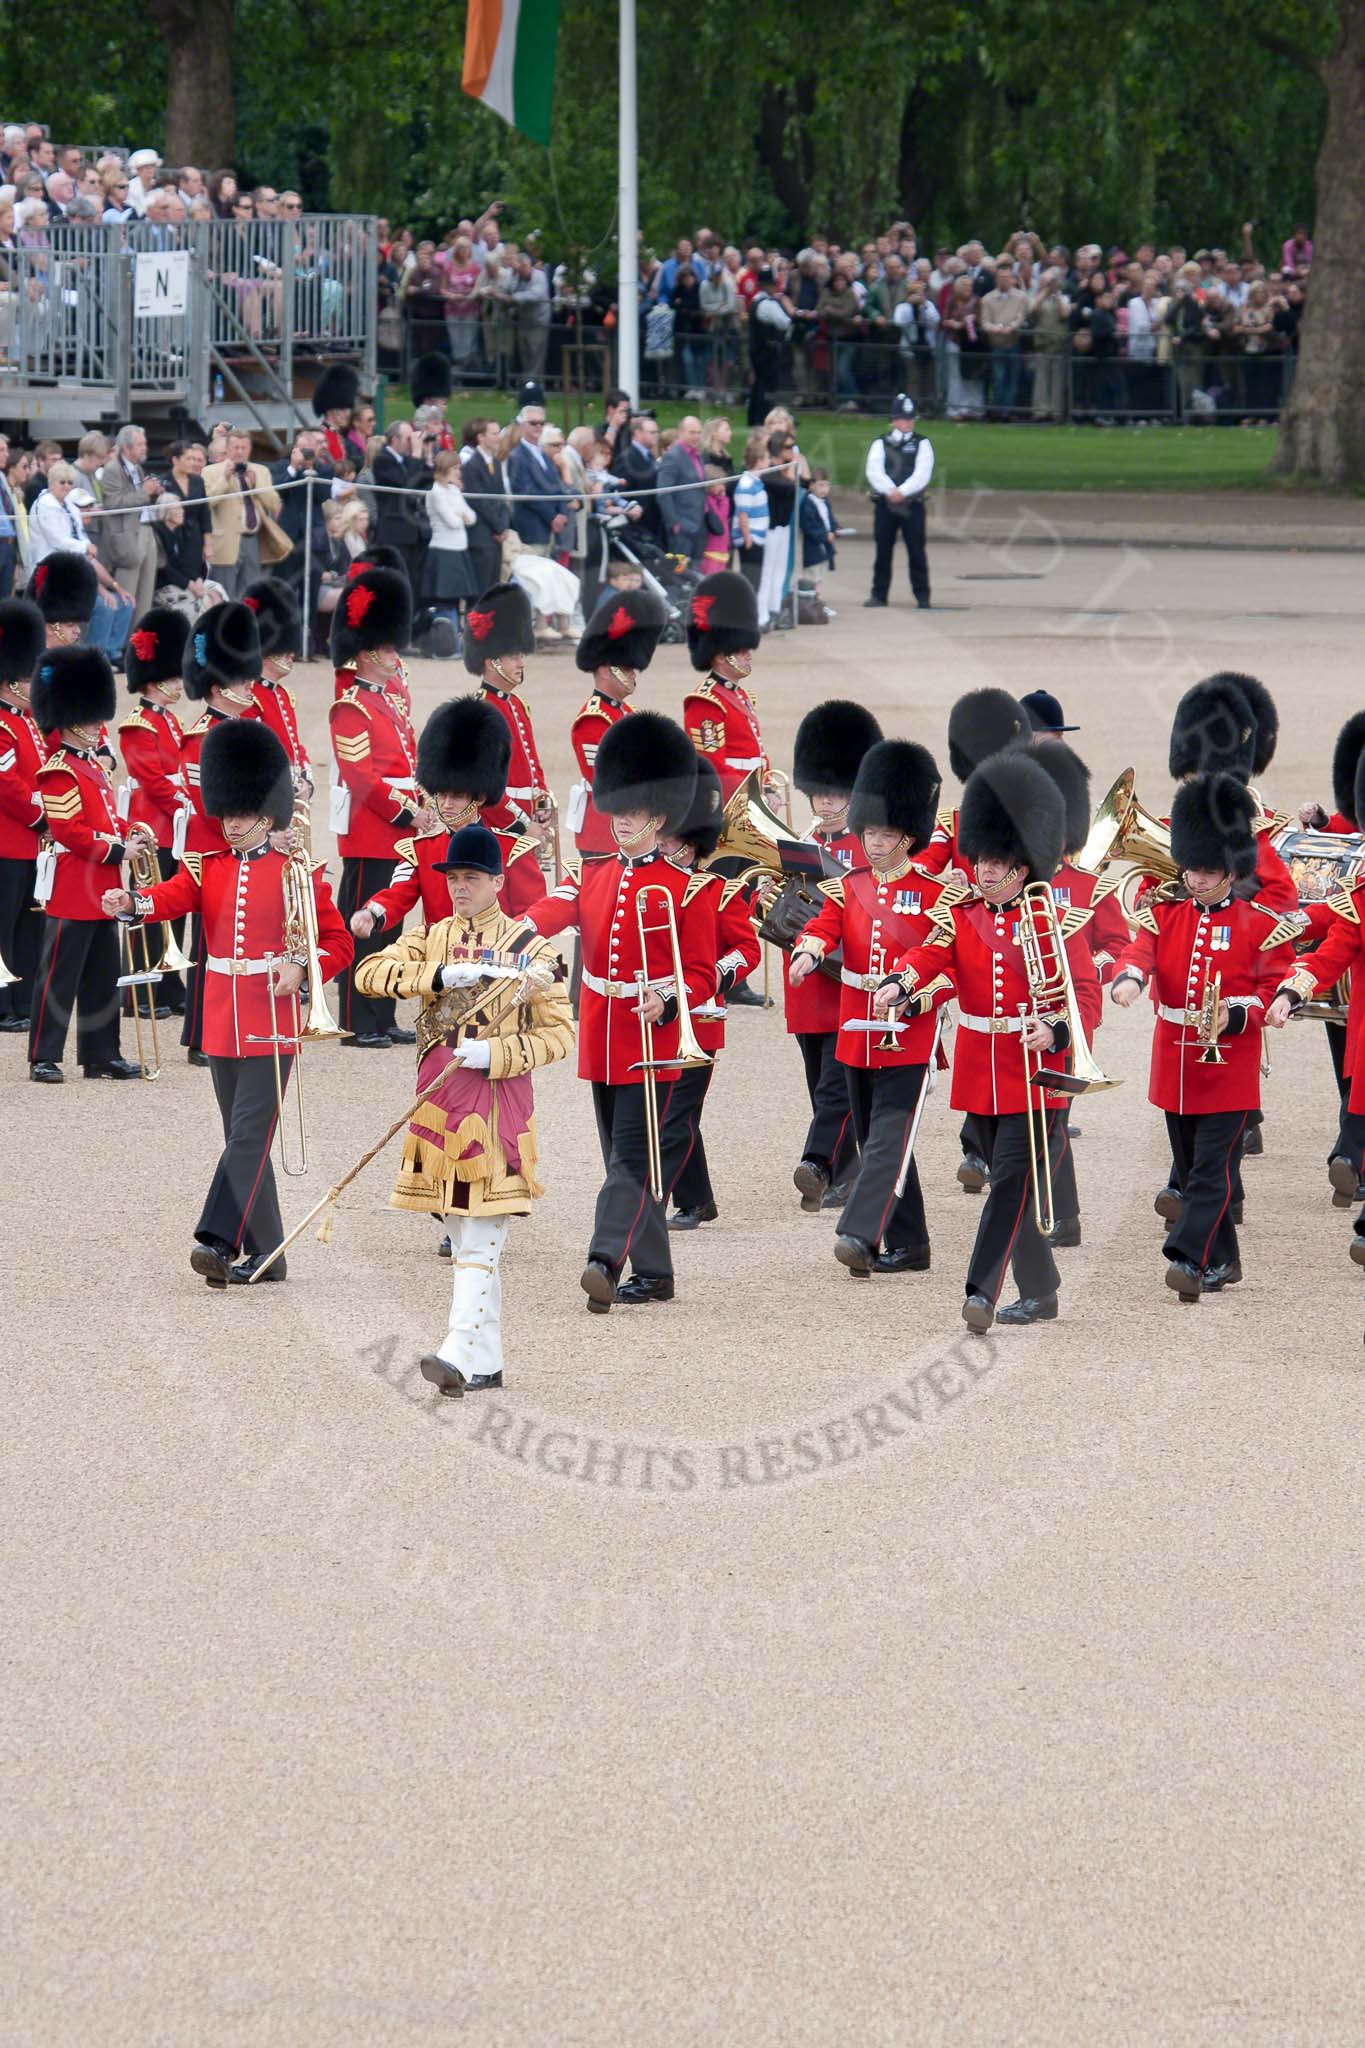 Trooping the Colour 2010: Thirty minutes before the start of the parade. The Band of the Grenadier Guards is led onto the parade ground by their Drum Major.

Already in position, with the red plumes on the bearskin, the Band of the Coldstream Guards.

In the background spectators watching from St. James's Park, on the western side of Horse Guards Parade.

The spectators on the top left of the photo are at the back of the garden of No. 10 Downing Street,.
Horse Guards Parade, Westminster,
London SW1,
Greater London,
United Kingdom,
on 12 June 2010 at 10:31, image #16